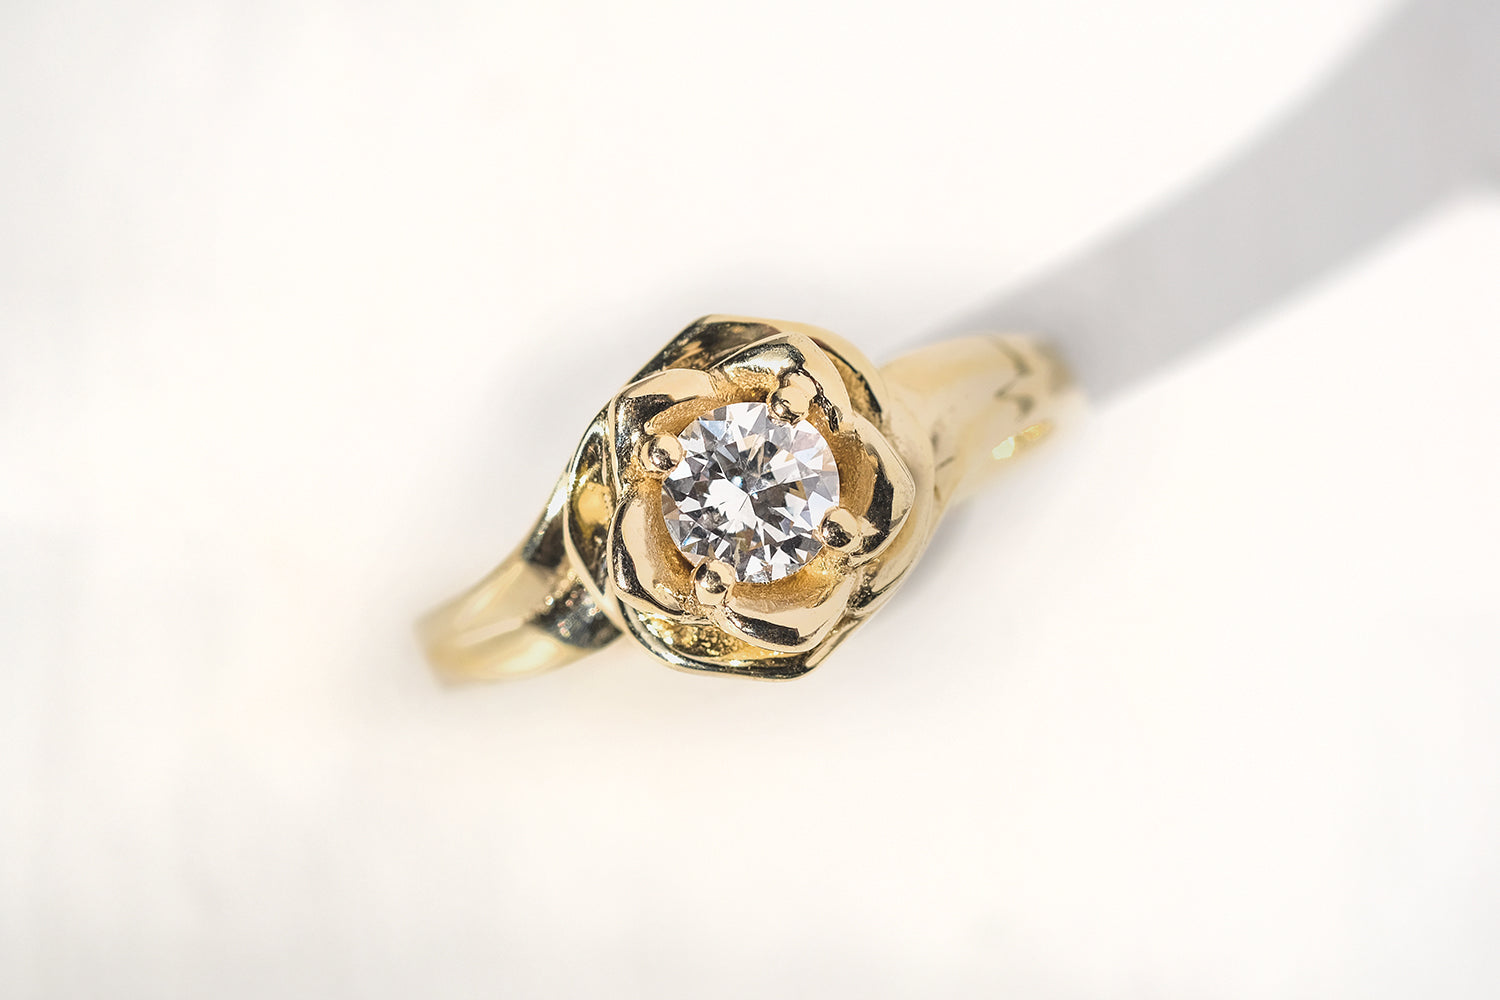 Gold Flower Engagement Ring Set With A Diamond